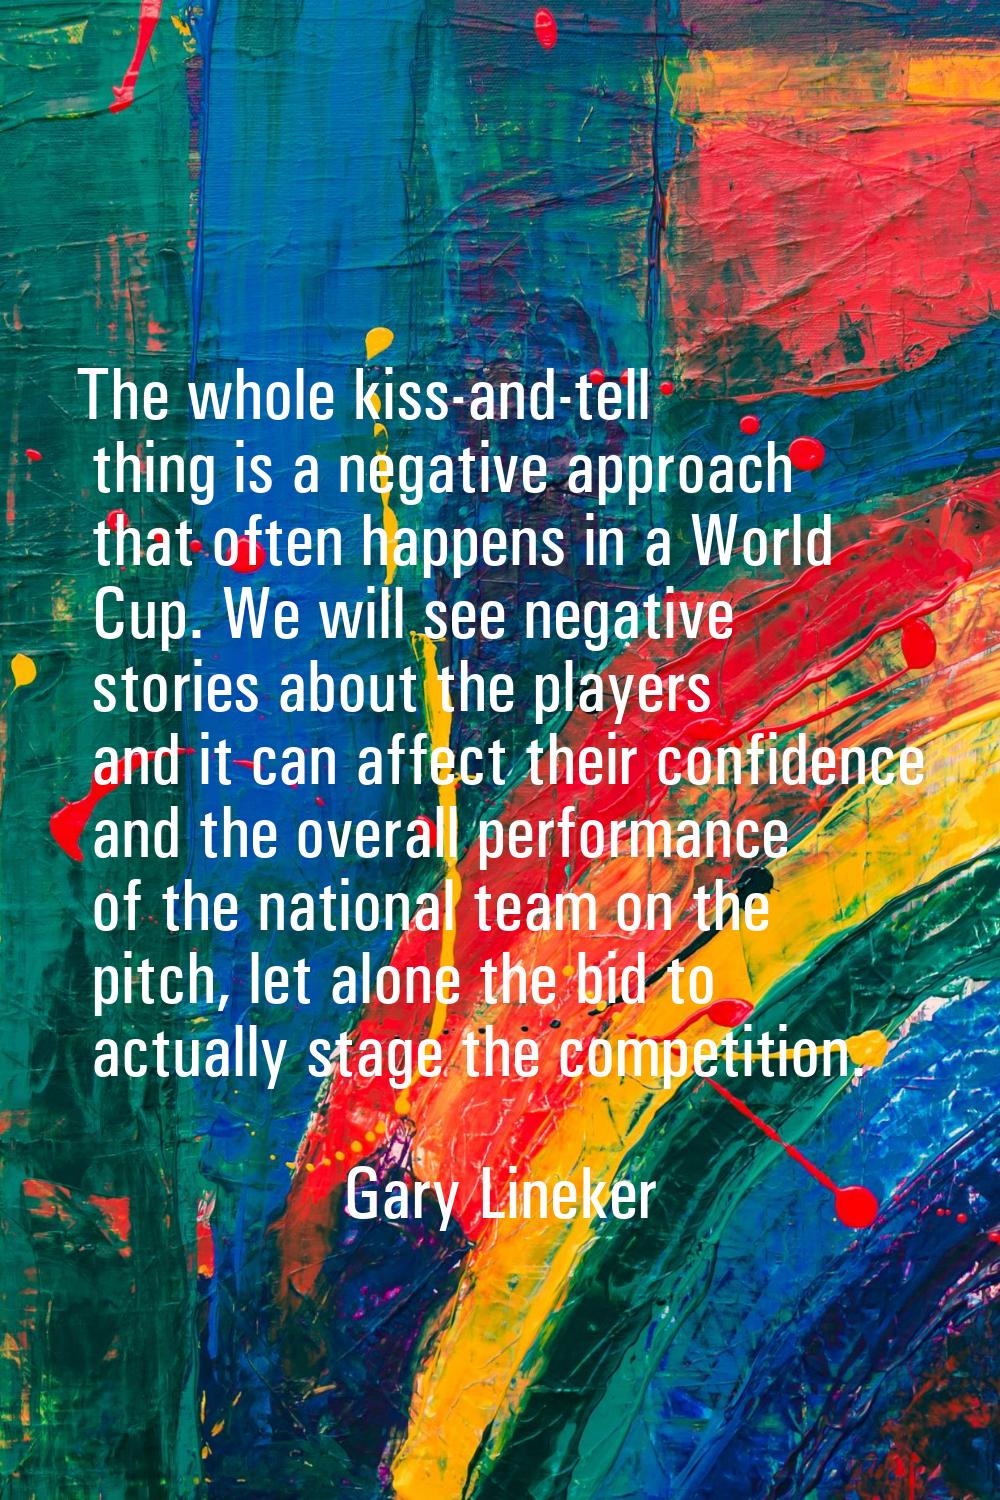 The whole kiss-and-tell thing is a negative approach that often happens in a World Cup. We will see